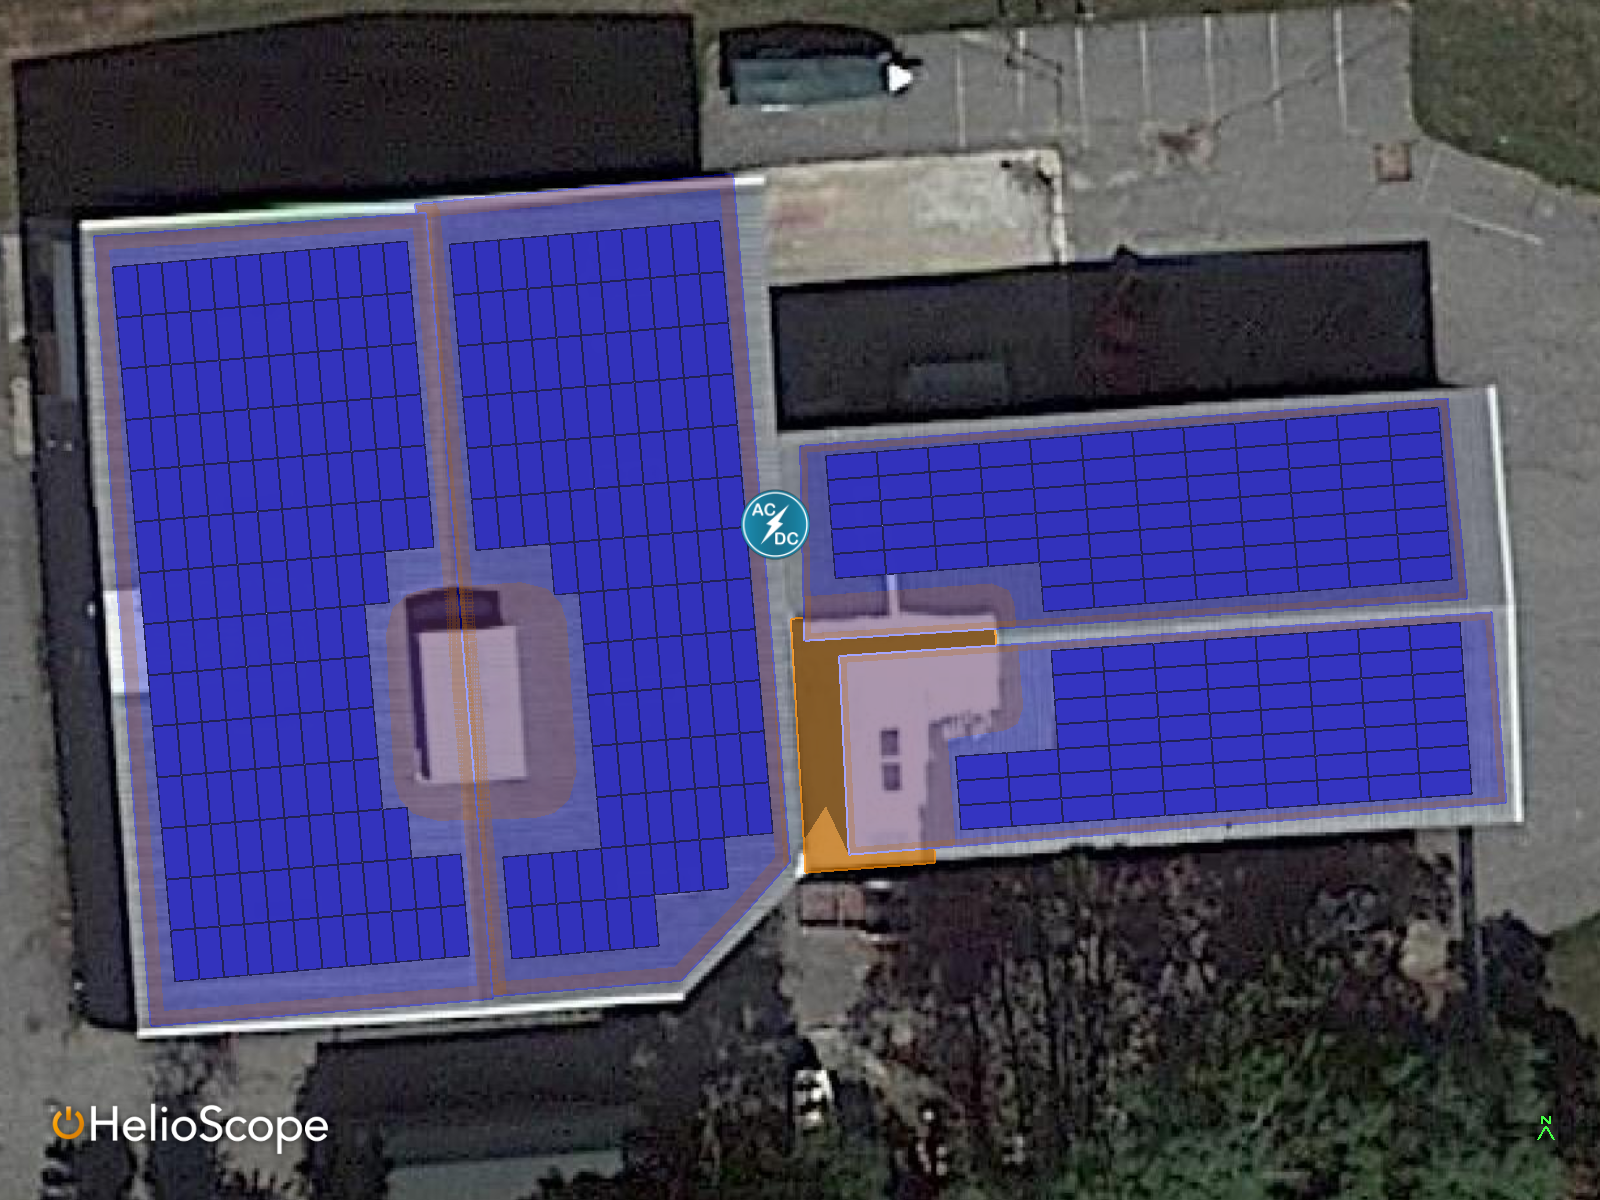 Image overly showing satellite view of a projected solar layout